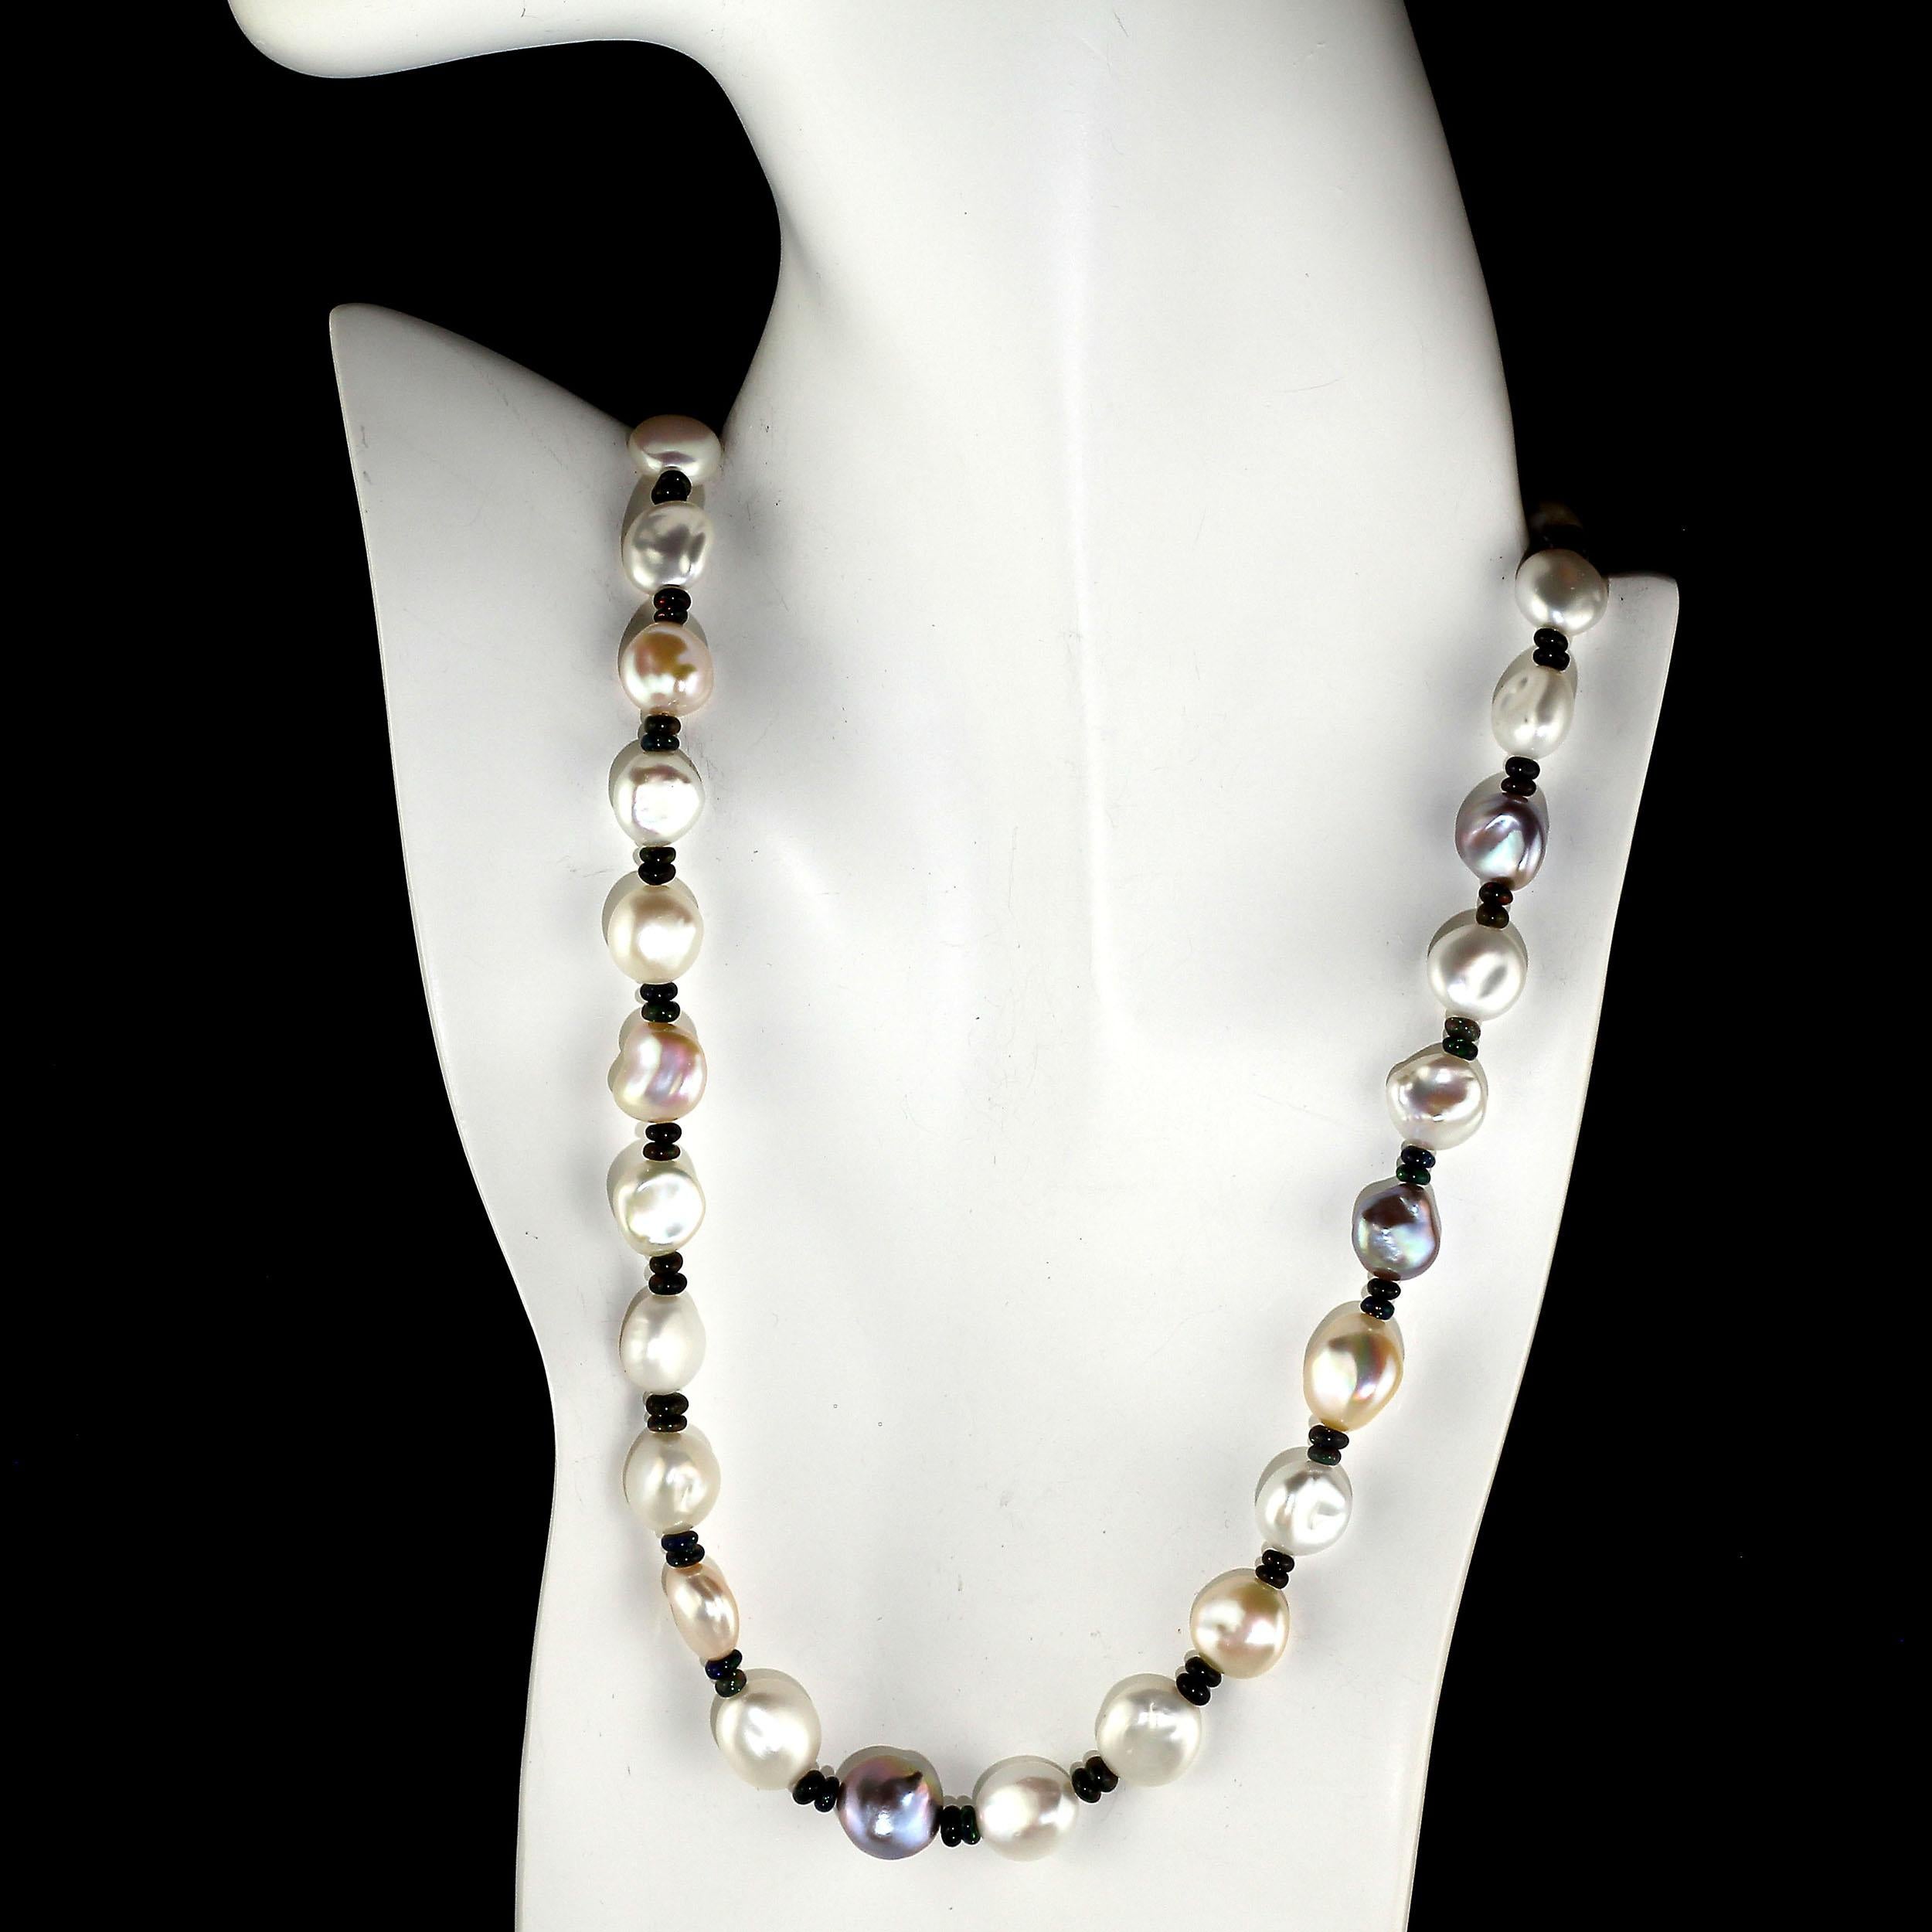 Bead Glowing, Freshwater Pearl Necklace with Black Opal Accents